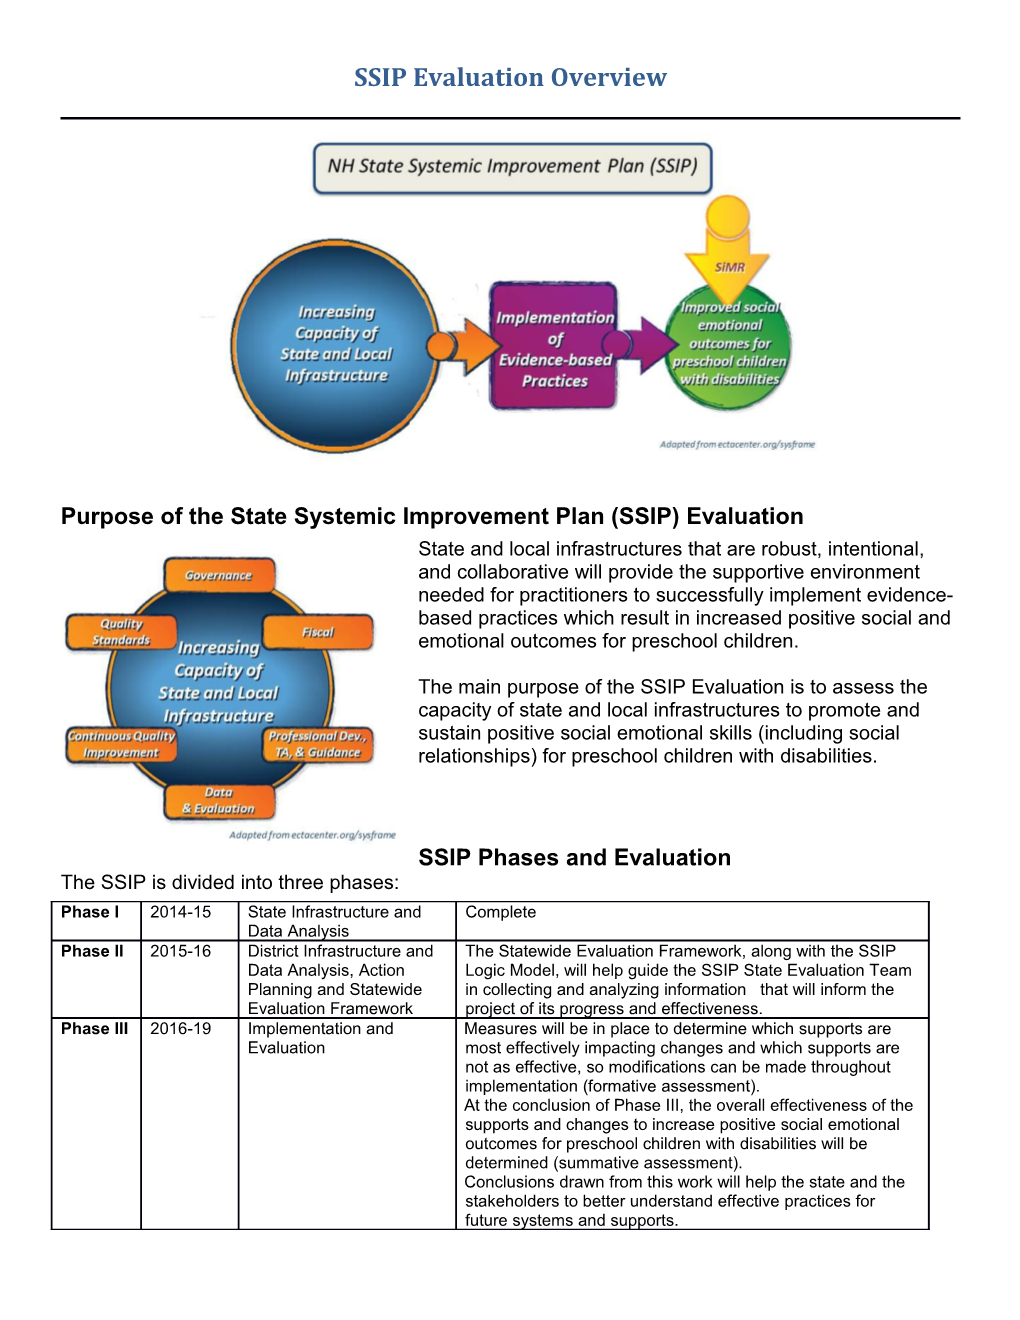 Purpose of the State Systemic Improvement Plan (SSIP) Evaluation